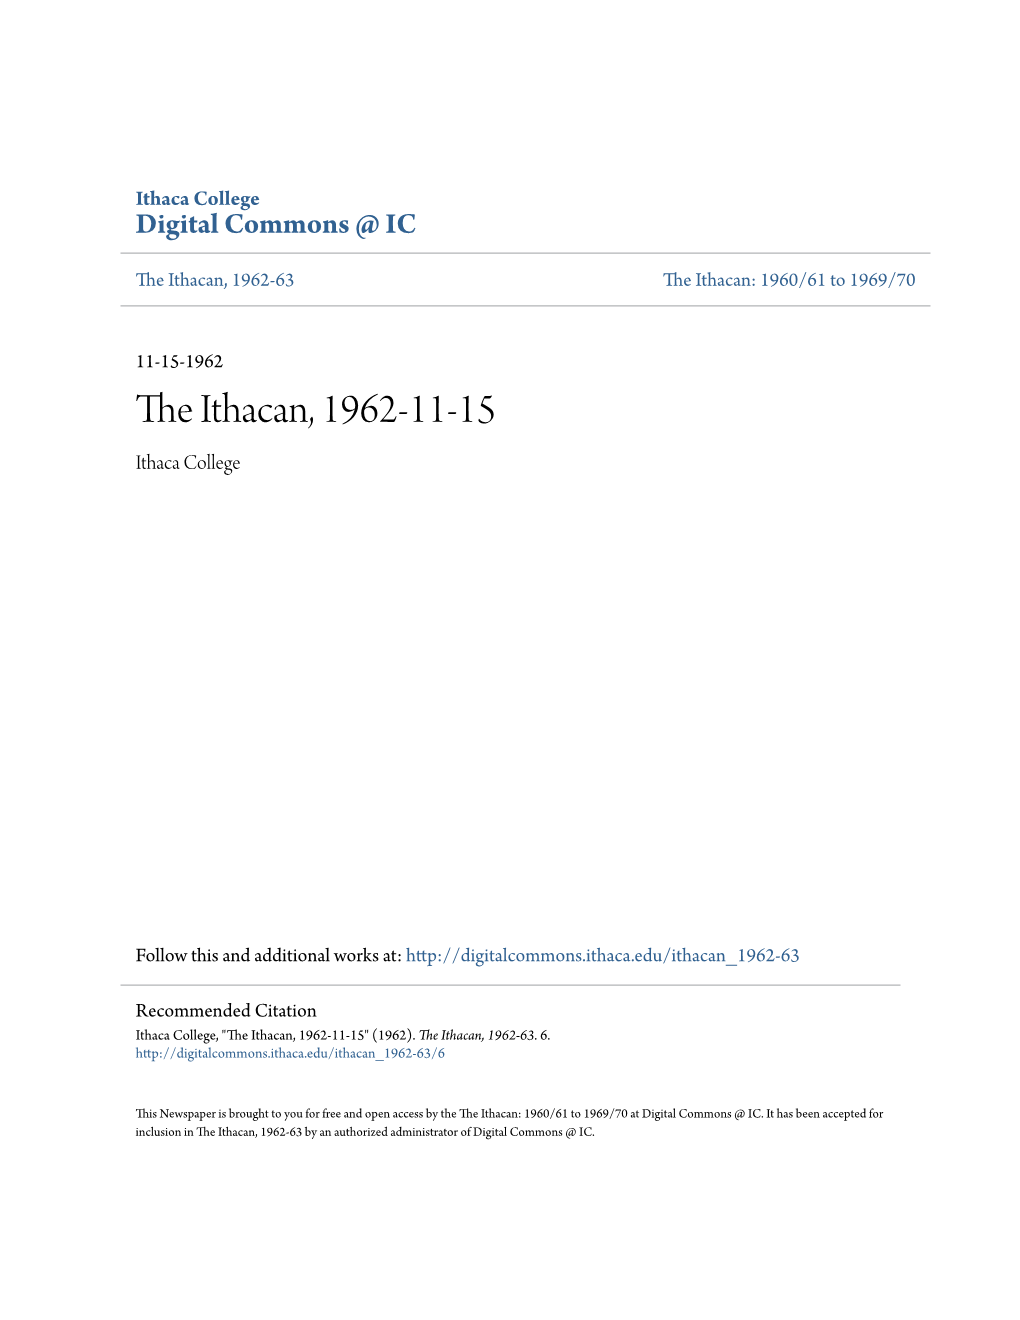 The Ithacan, 1962-11-15